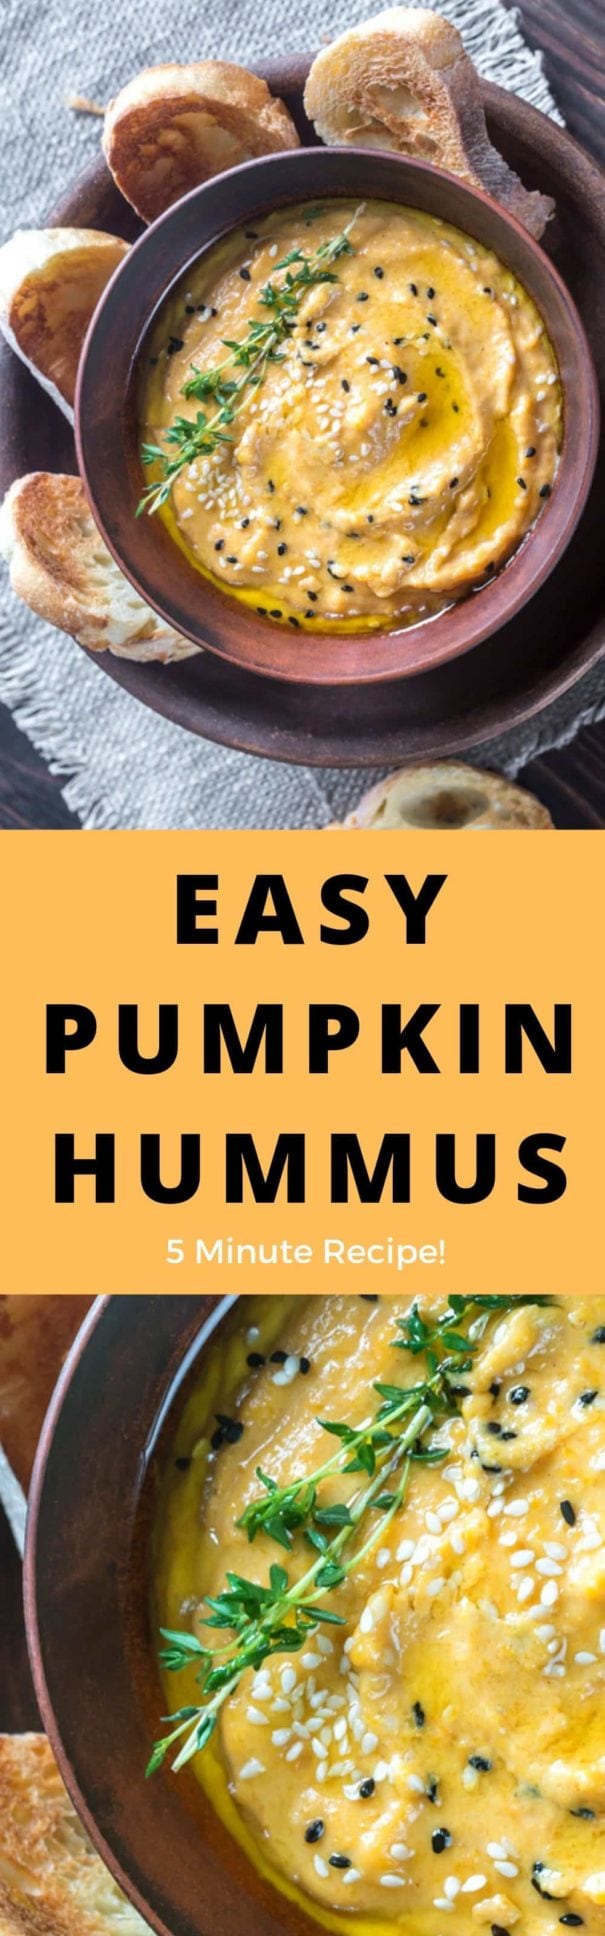 This savory pumpkin hummus is deliciously creamy and so easy to prep! It pairs perfectly with baked pita chips, crackers, toast, veggies, and even works great as a spread. You’re going to want to serve this tasty, fall-flavored dip for Thanksgiving and other gatherings this fall.